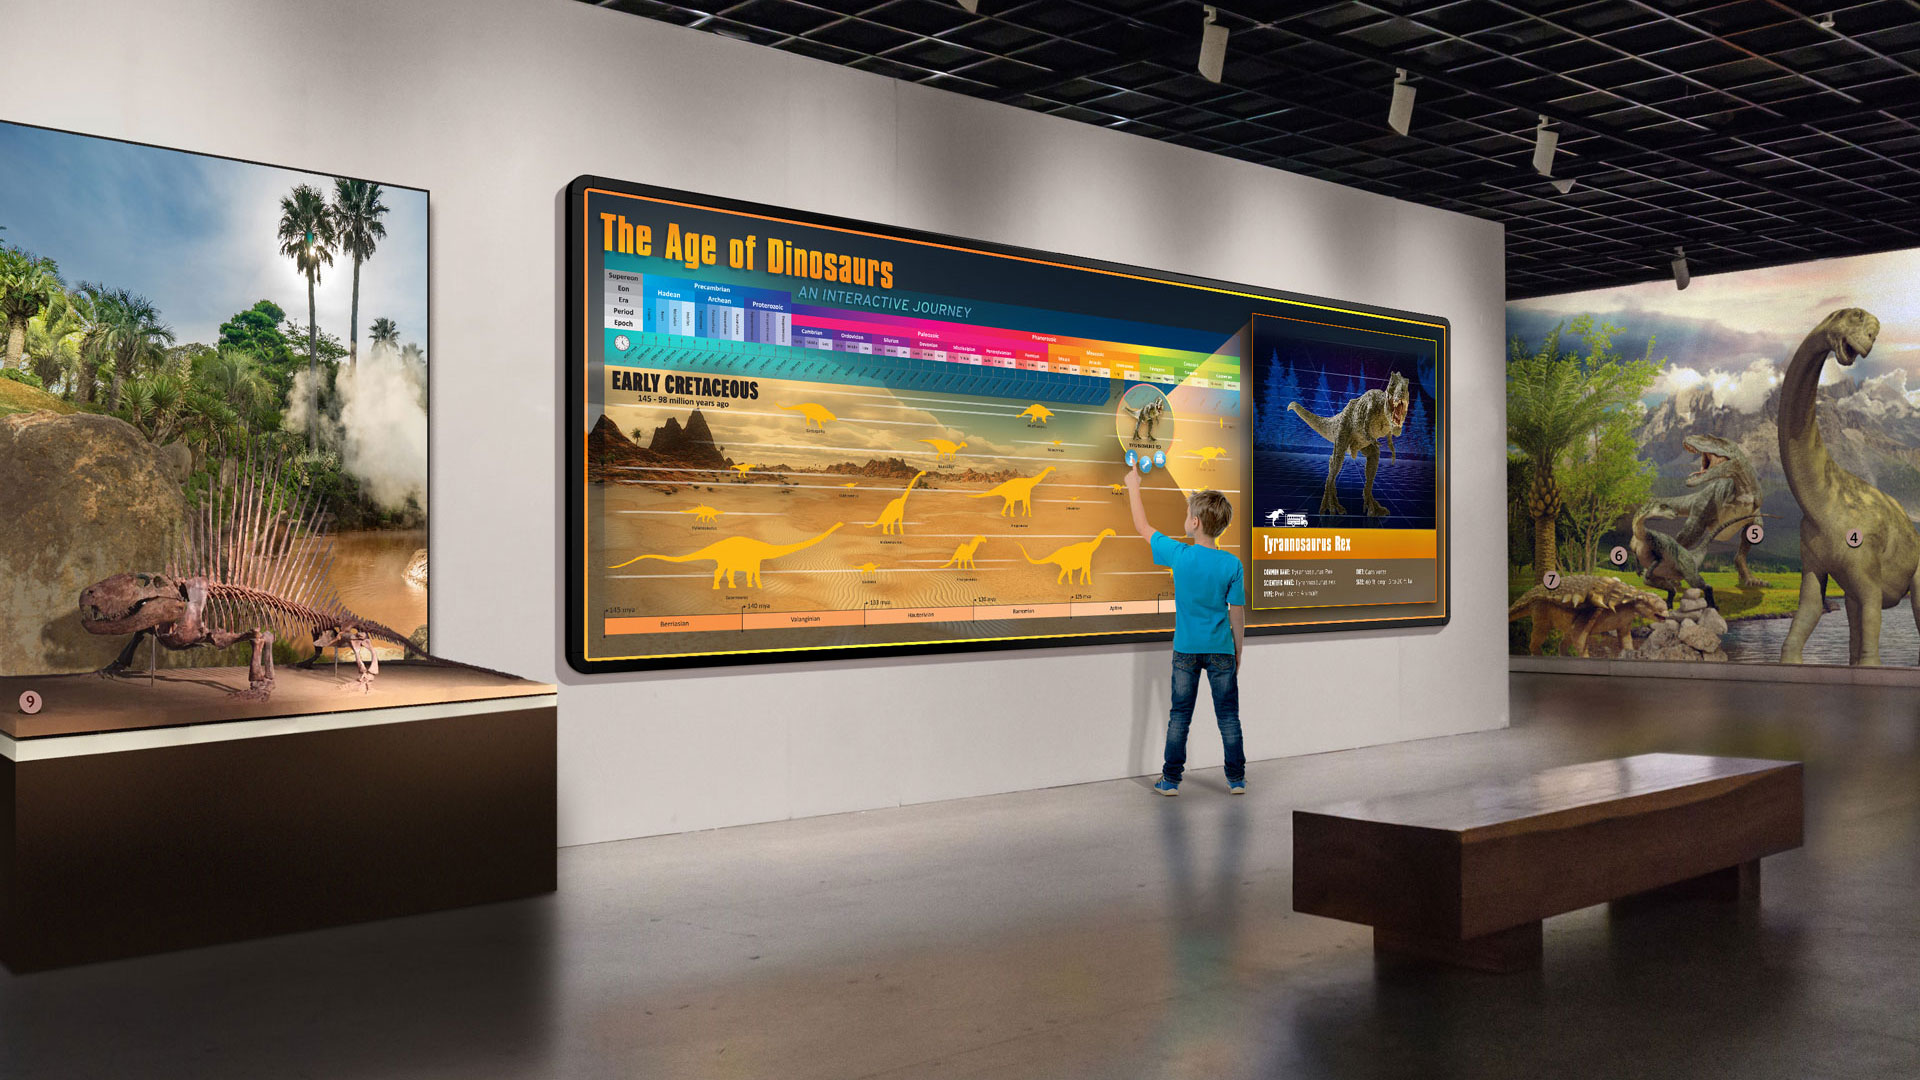 Digital video wall screen content in a museum created by Incubate Design for Planar